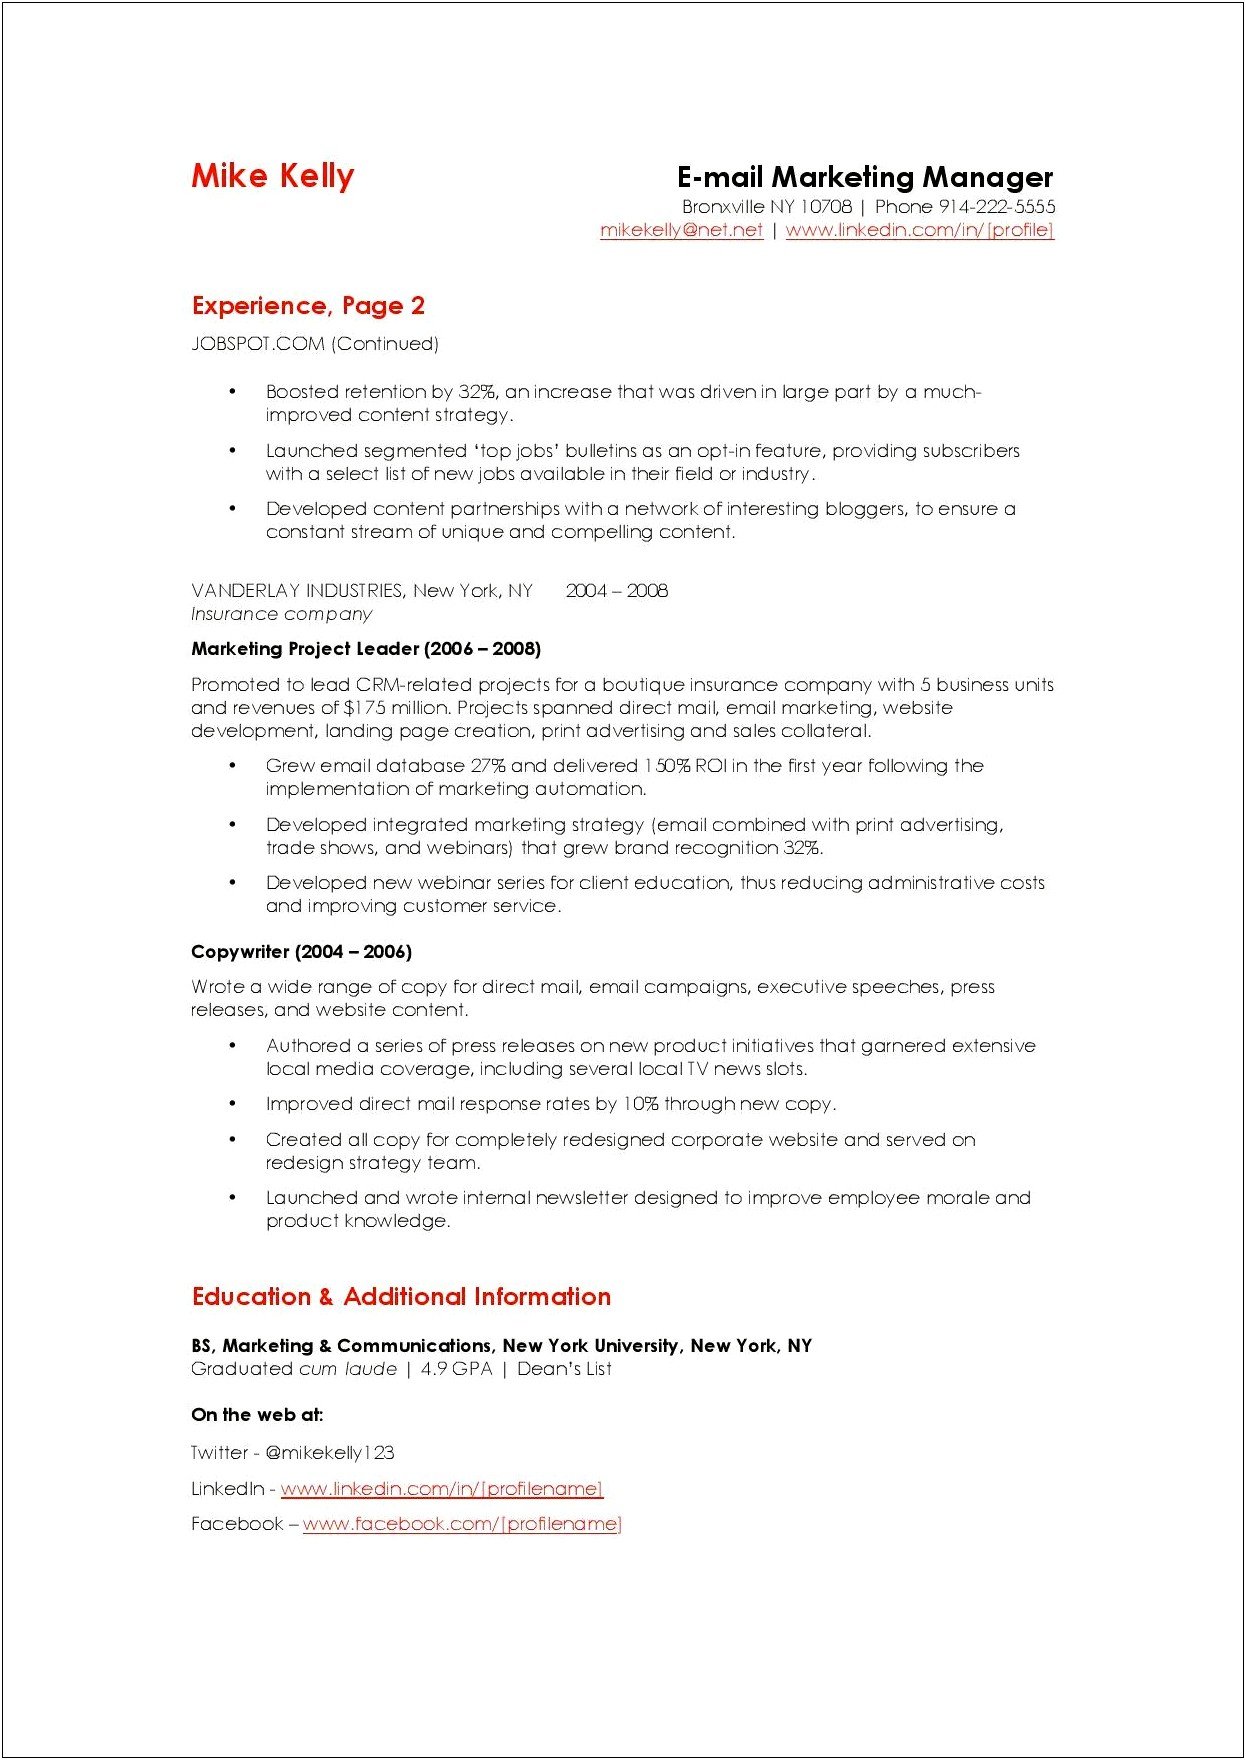 Rn Resume With Marketing Job Experience